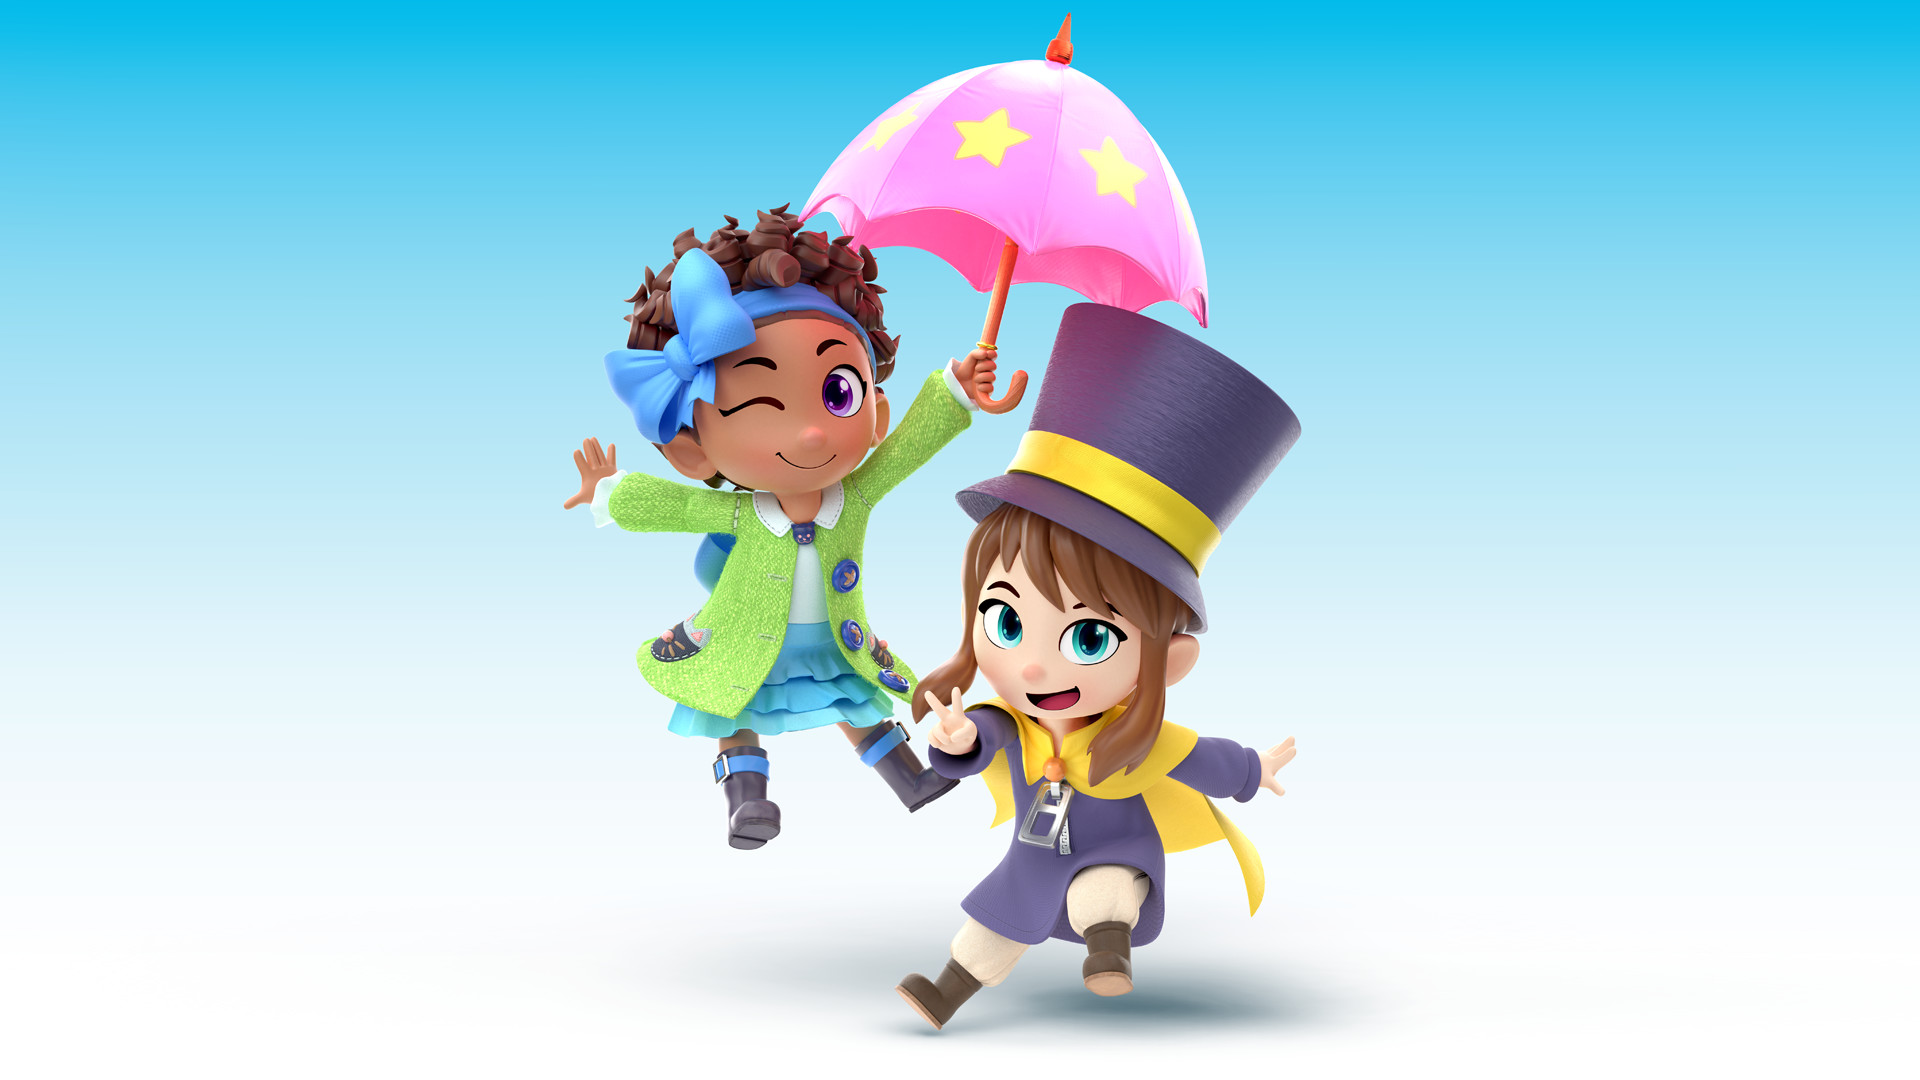 a hat in time 2